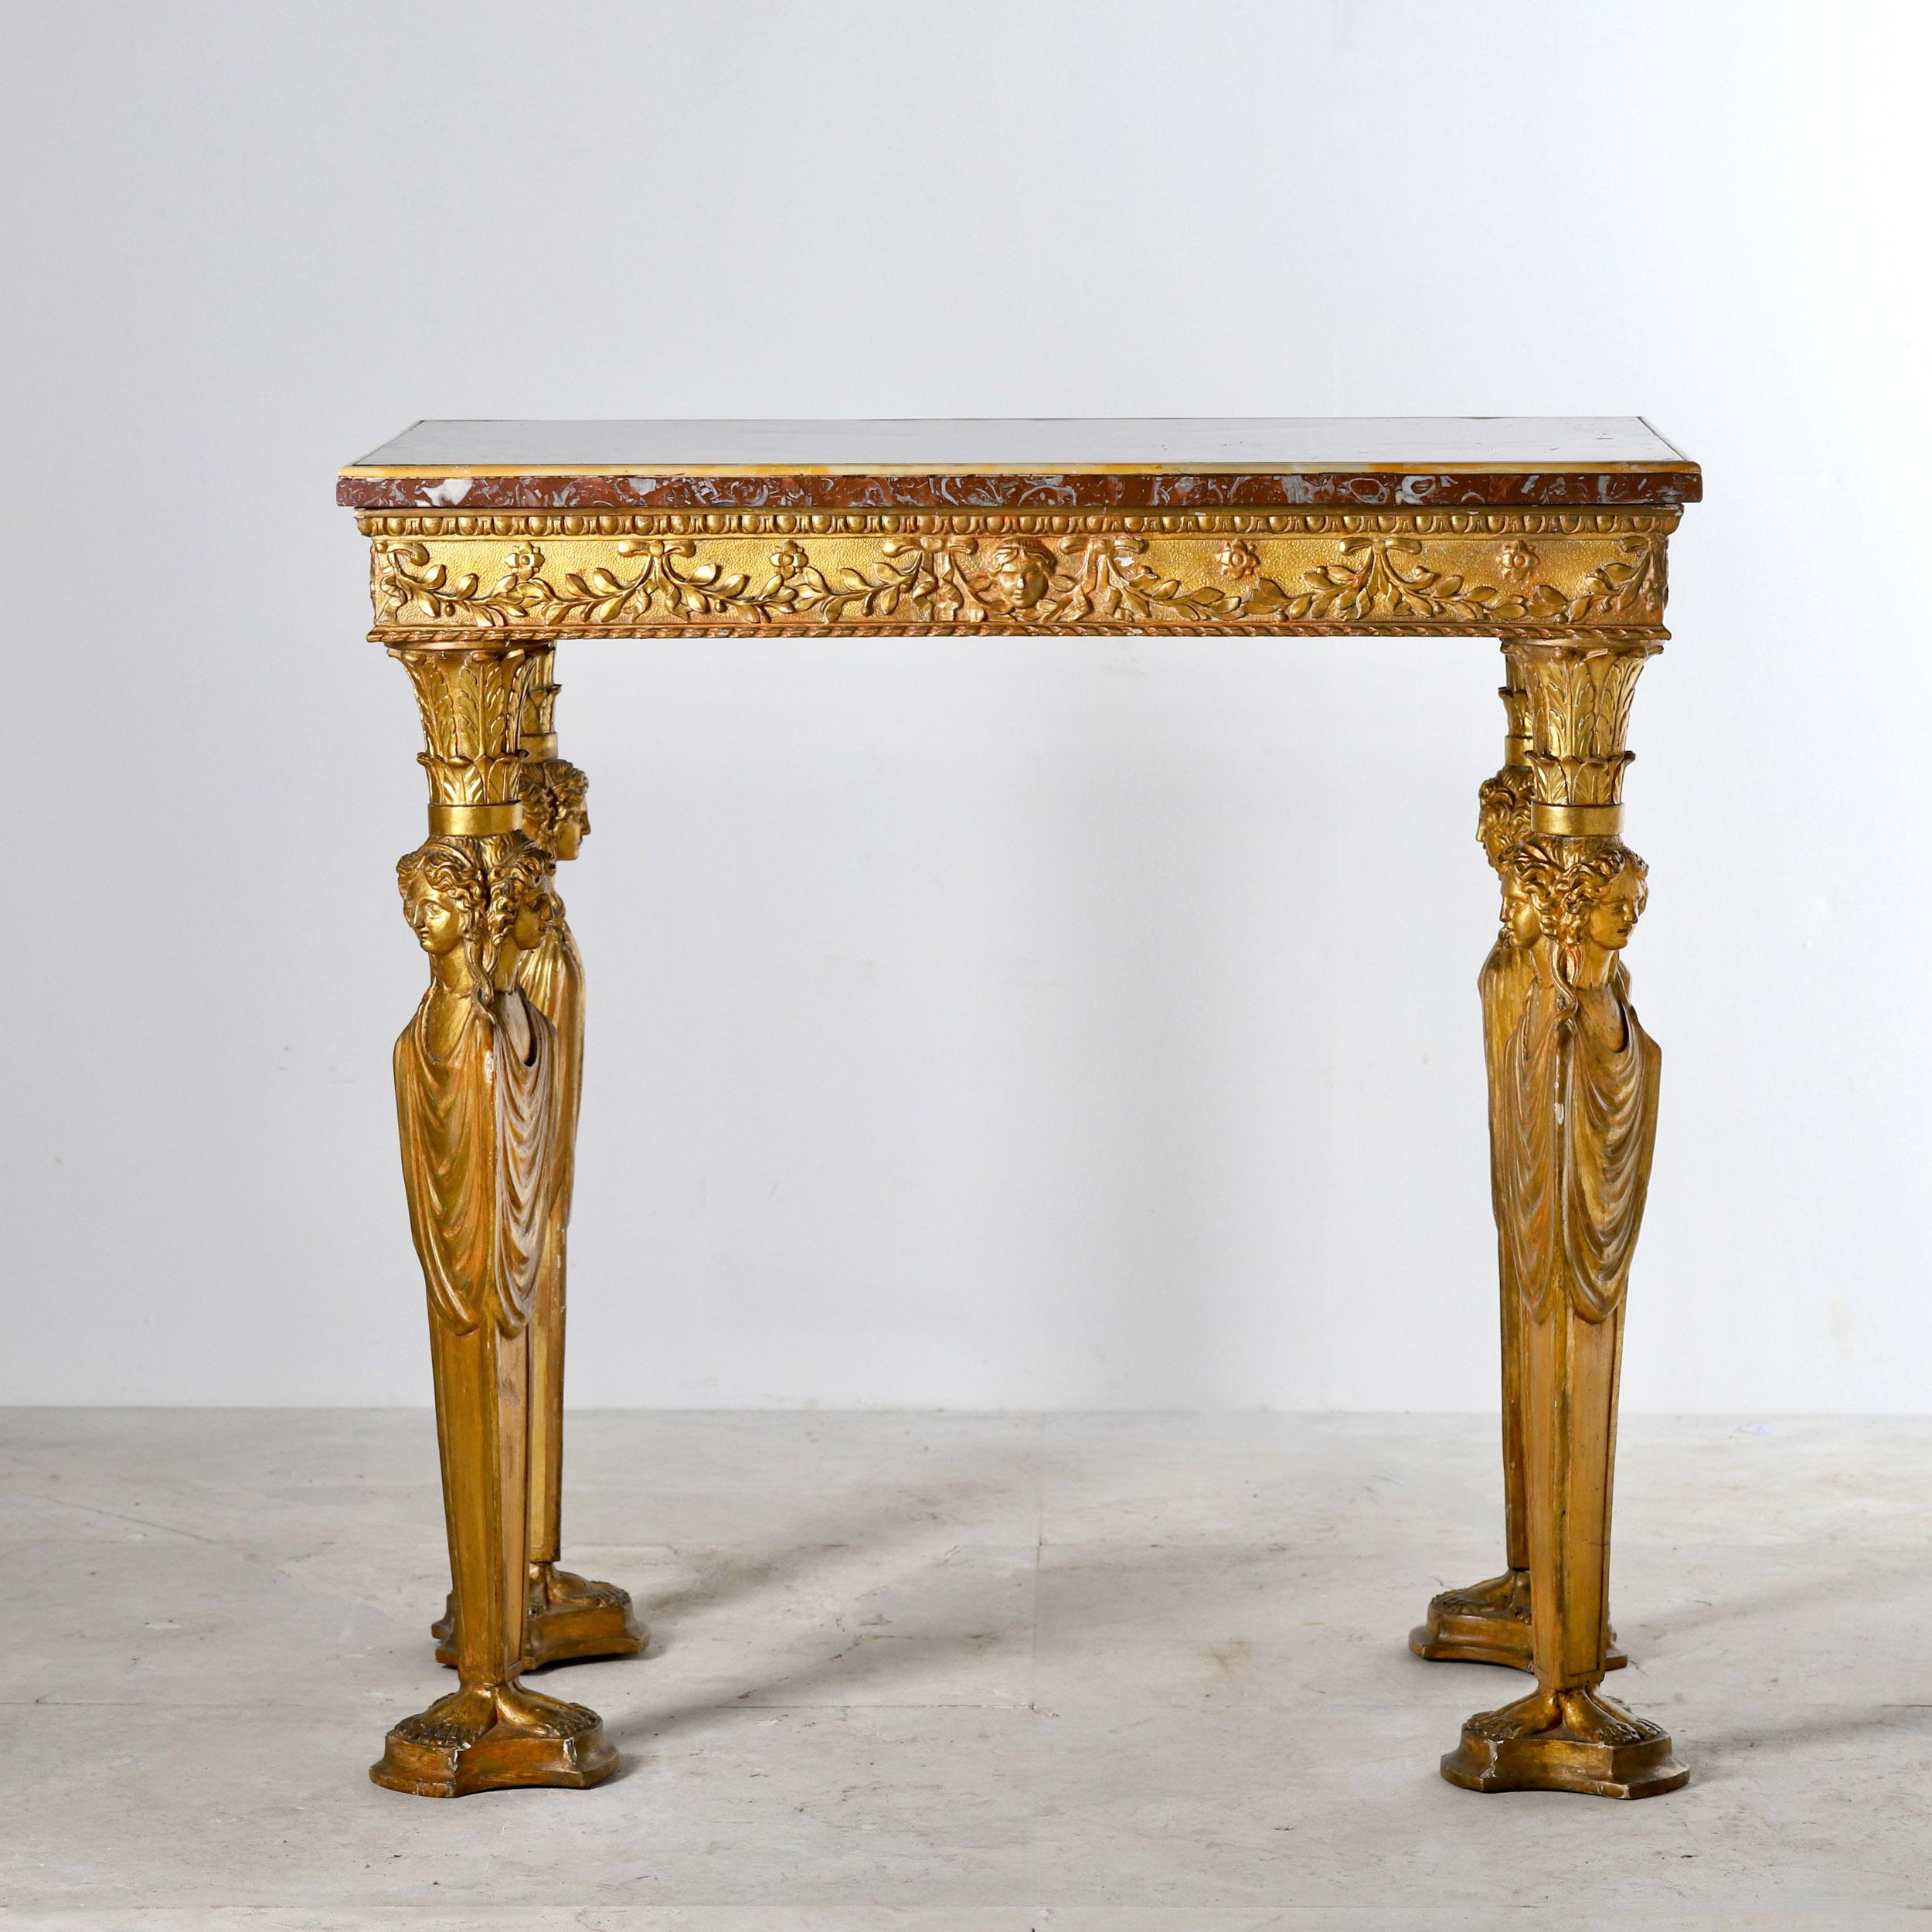 A stunning 19th century center table constructed in Rome in the early 19th century. Centre tables and consoles from Rome have been highly desirable pieces since the 18th century and made ever popular by the Europeans on their 'Grand Tour,' this